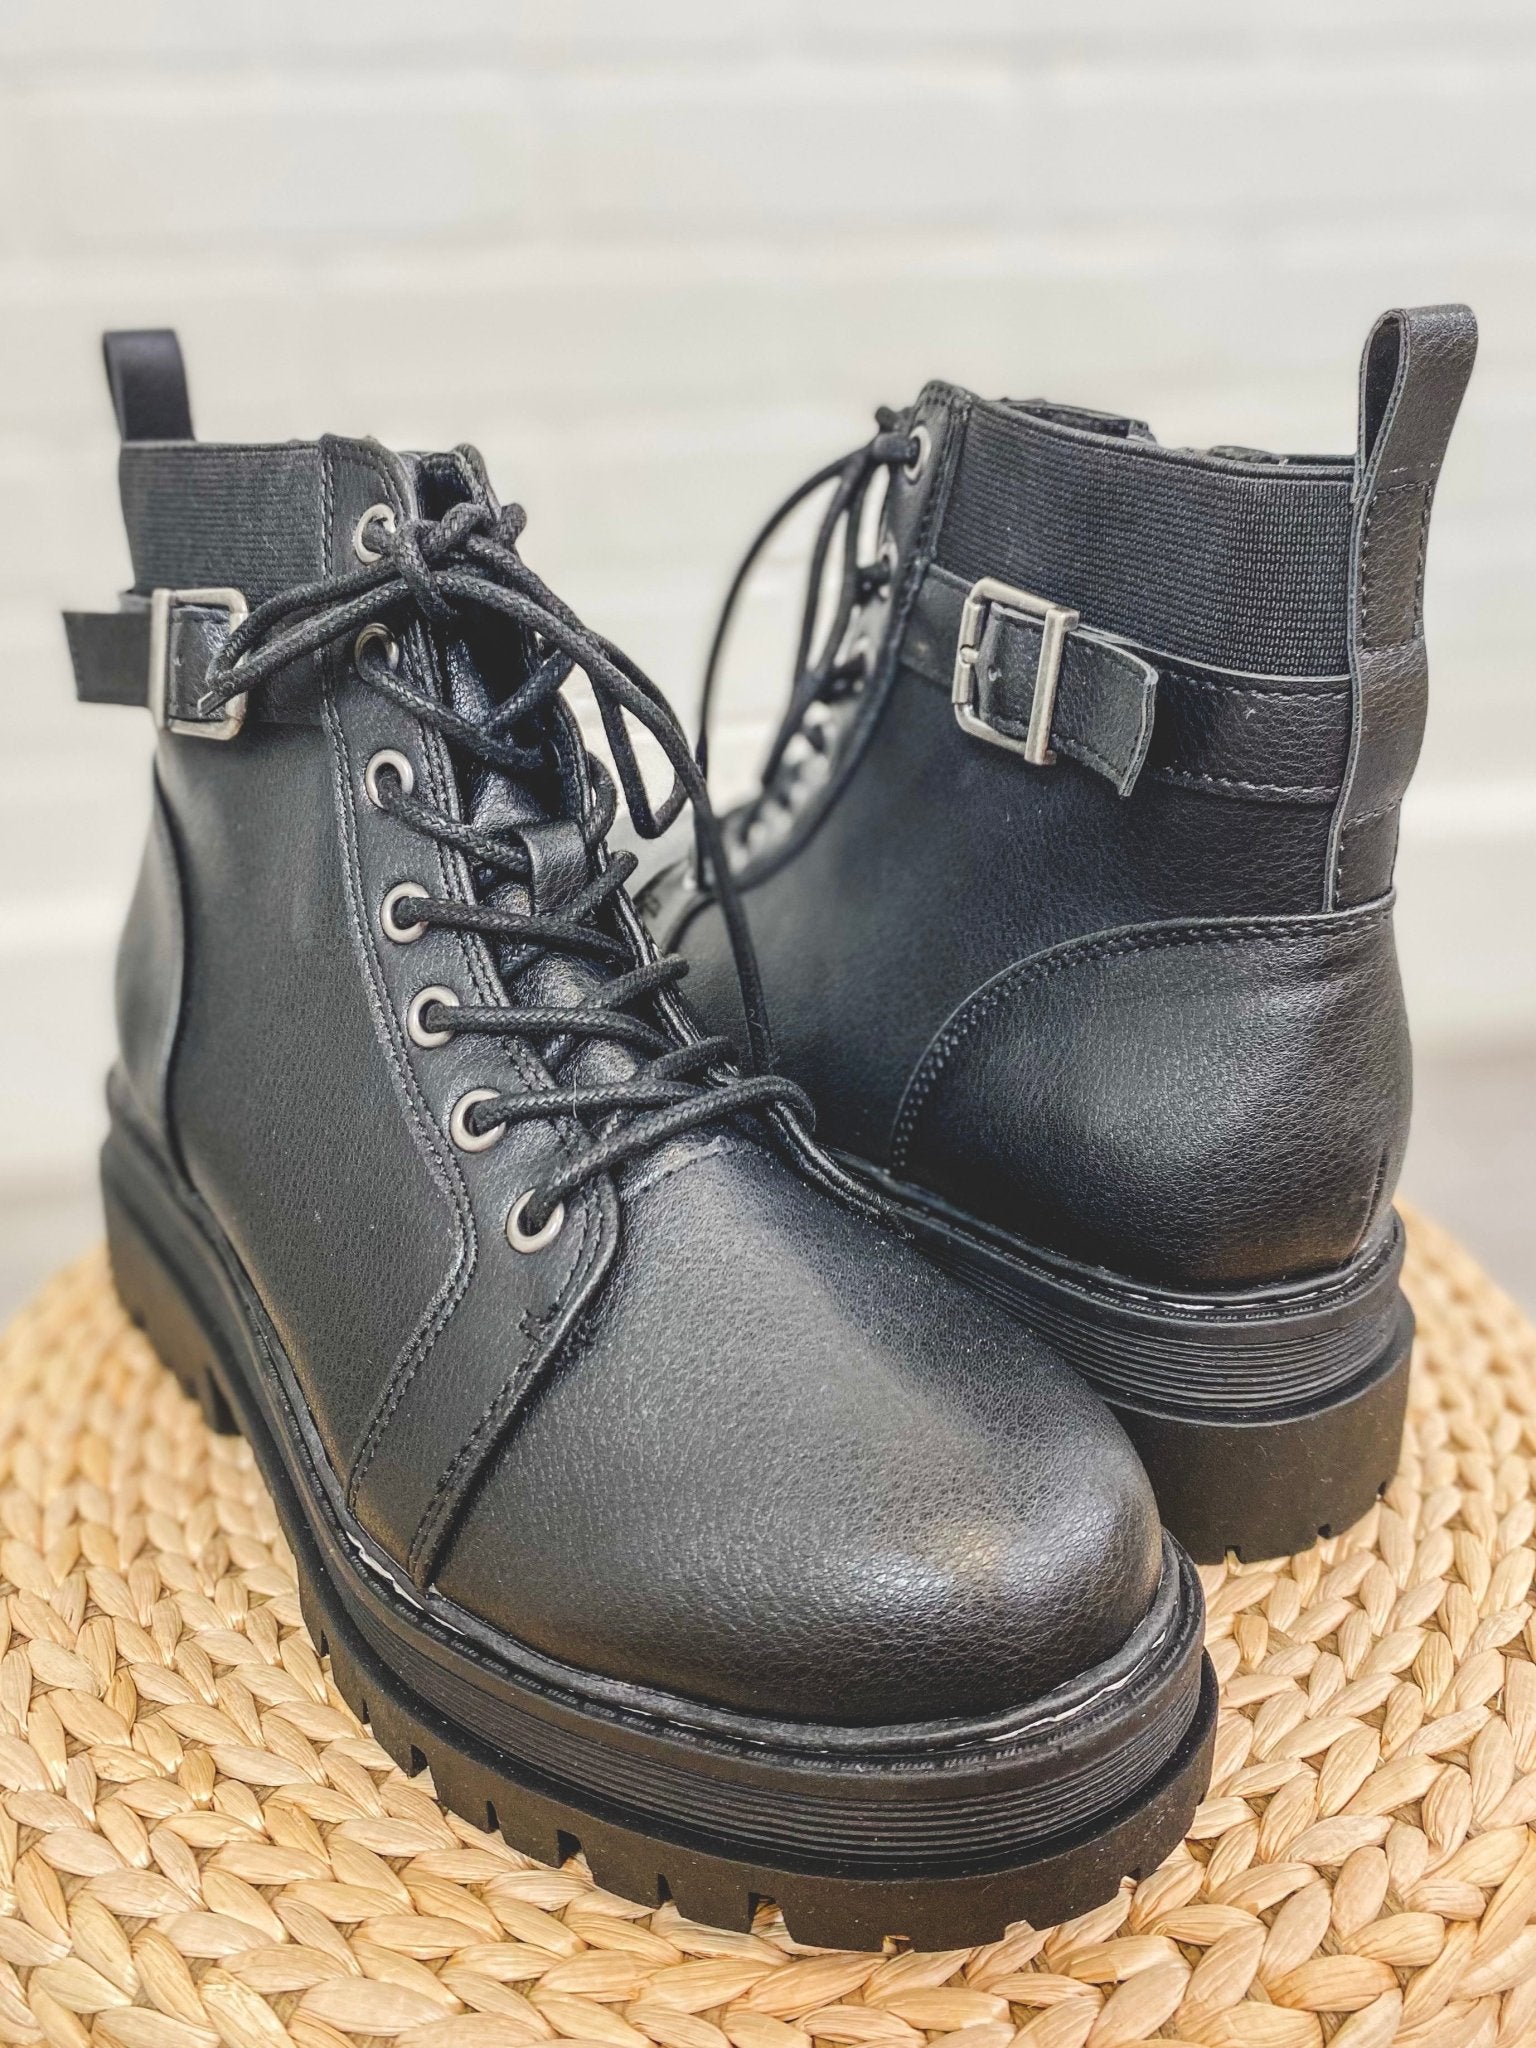 Lace up combat boots black Stylish Shoes - Womens Fashion Shoes at Lush Fashion Lounge Boutique in Oklahoma City